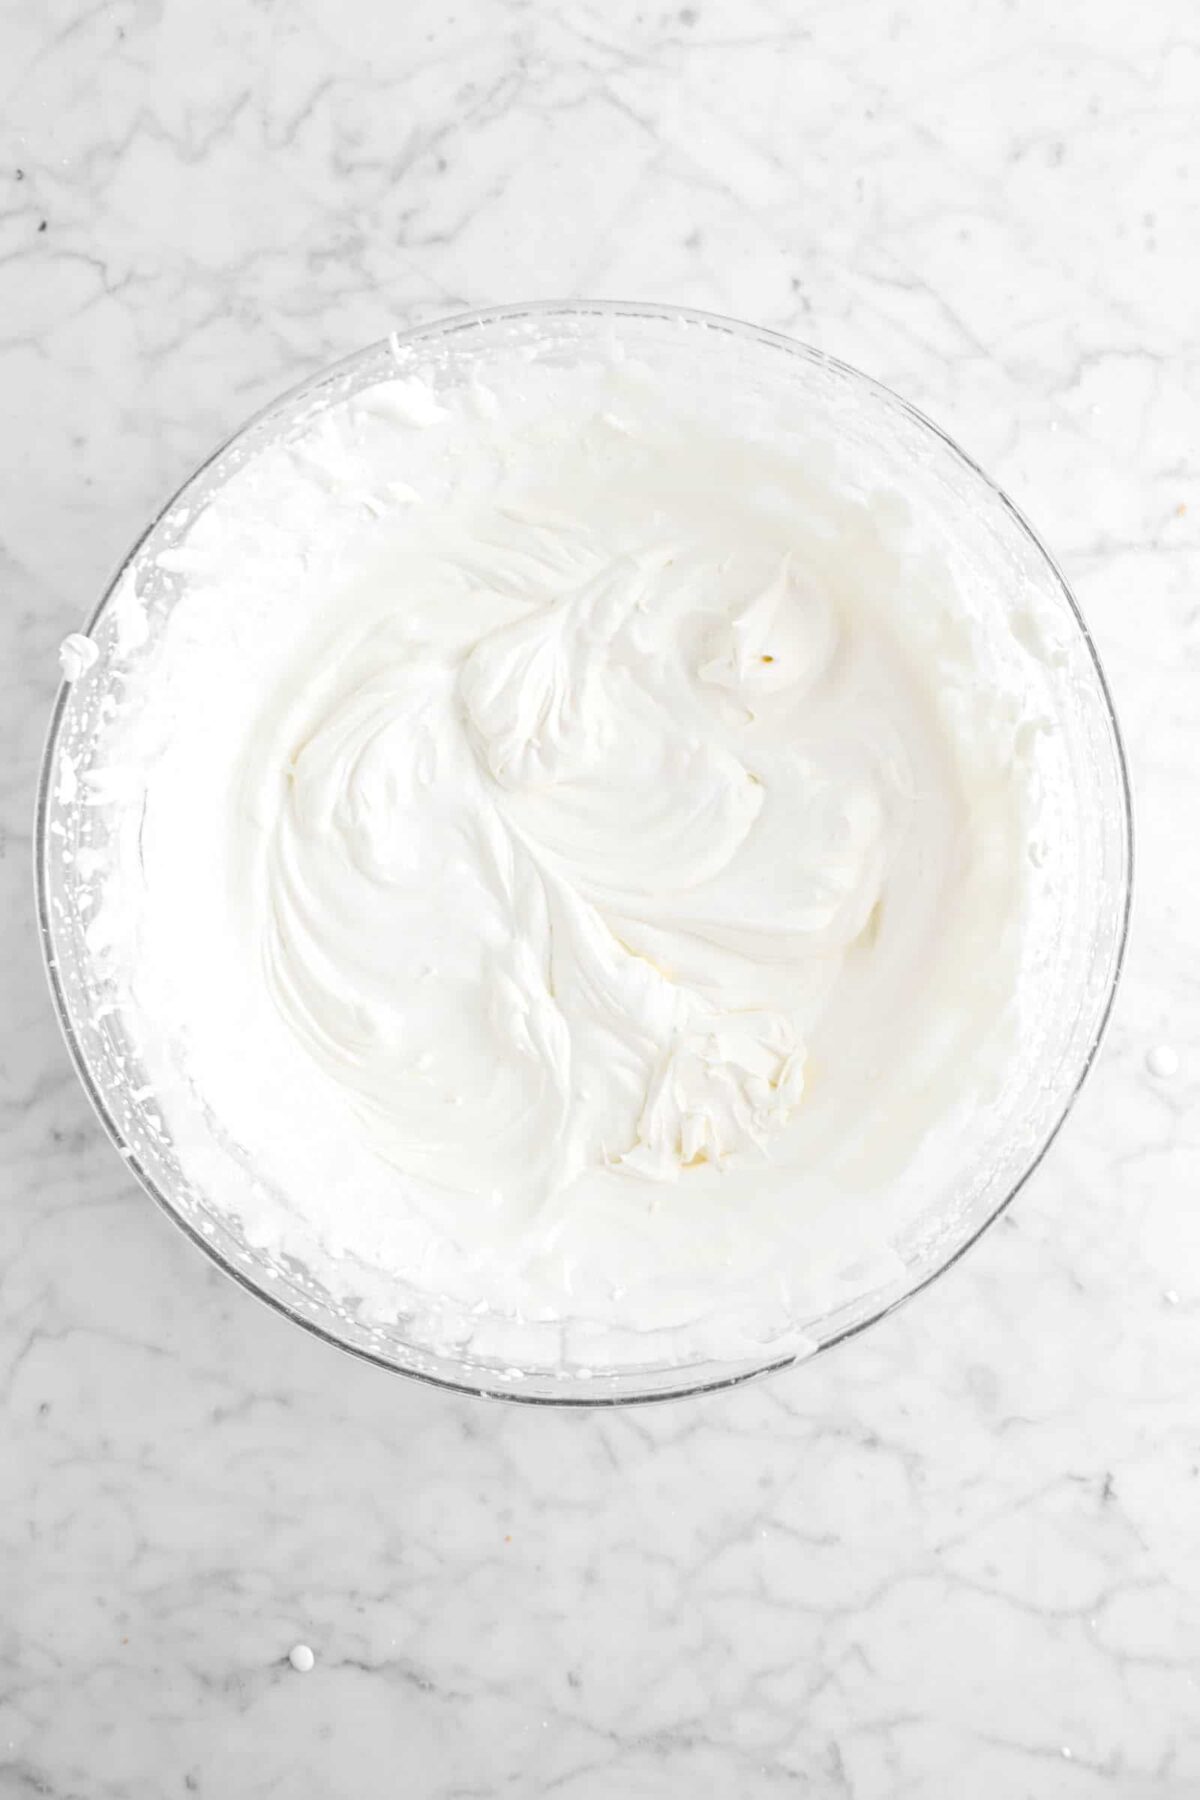 chantilly cream in a glass bowl